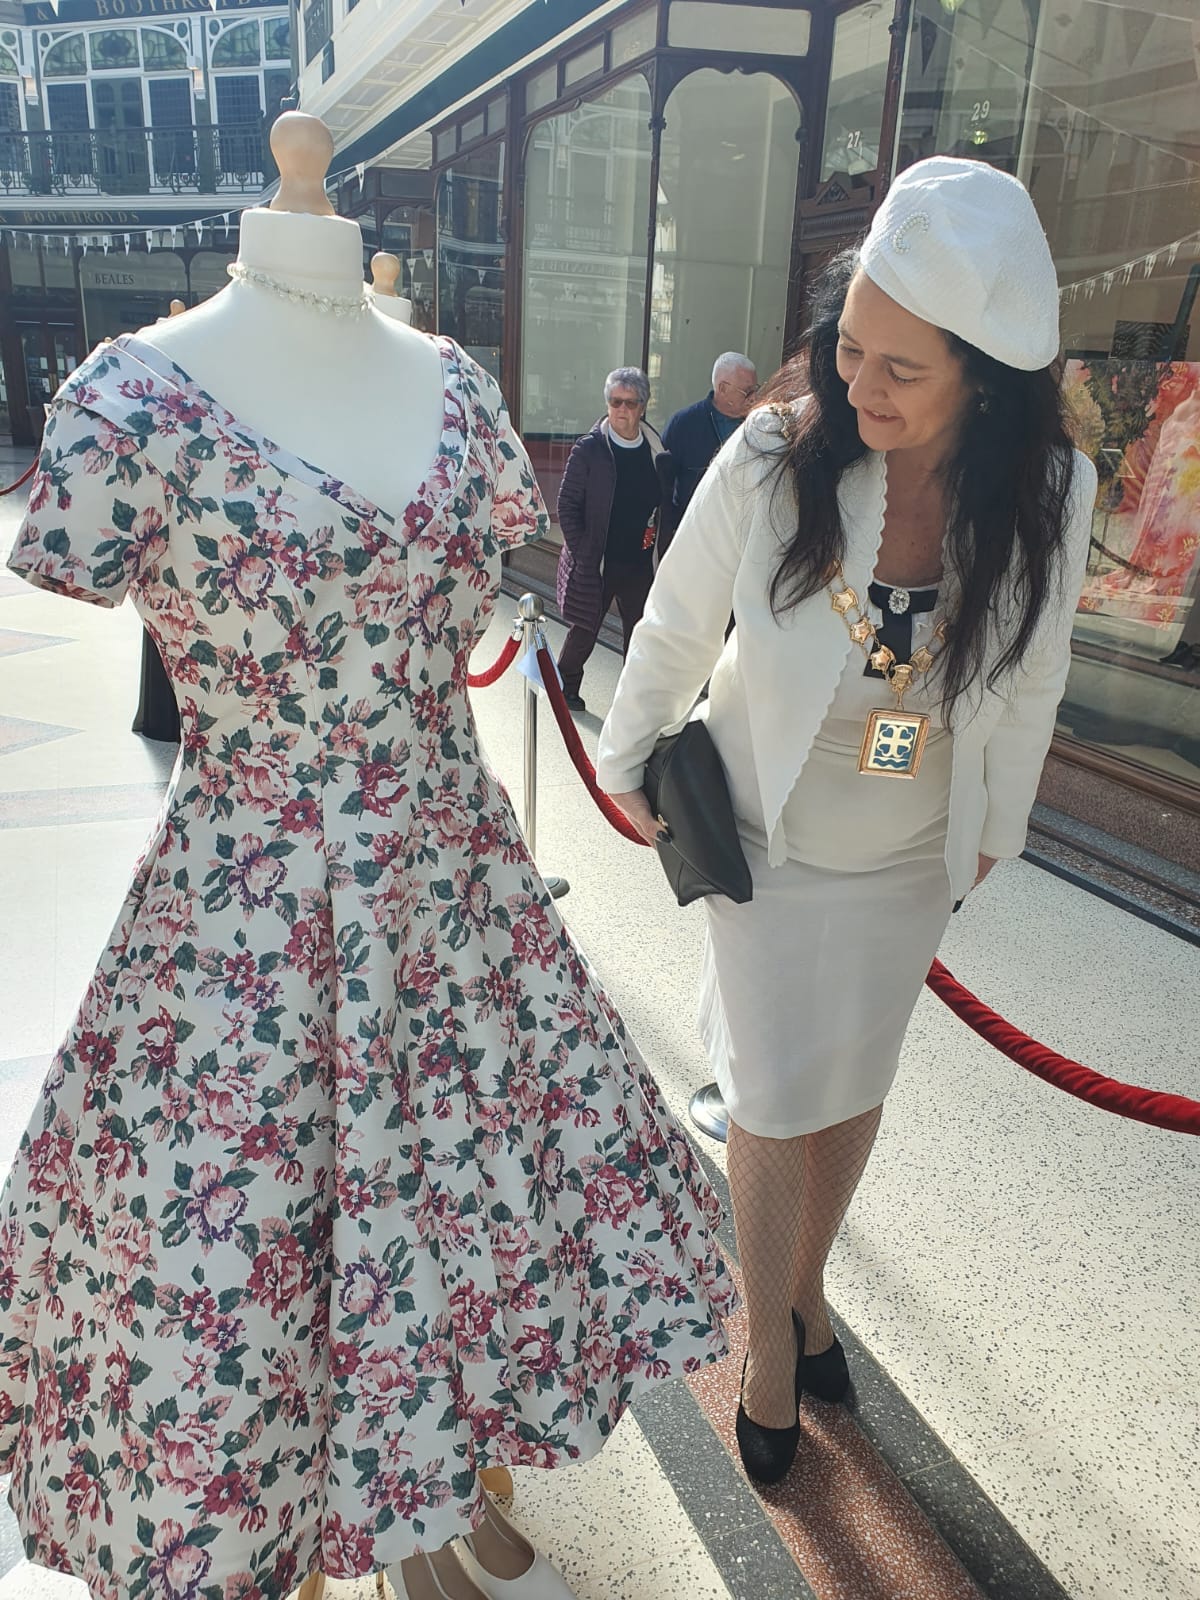 Mayor of Sefton Cllr Clare Carragher has praised a local fashion designer Mark Lyon Taylor who has created beautiful vintage fashion from every decade going back to the 1890s at Wayfarers Arcade in Southport